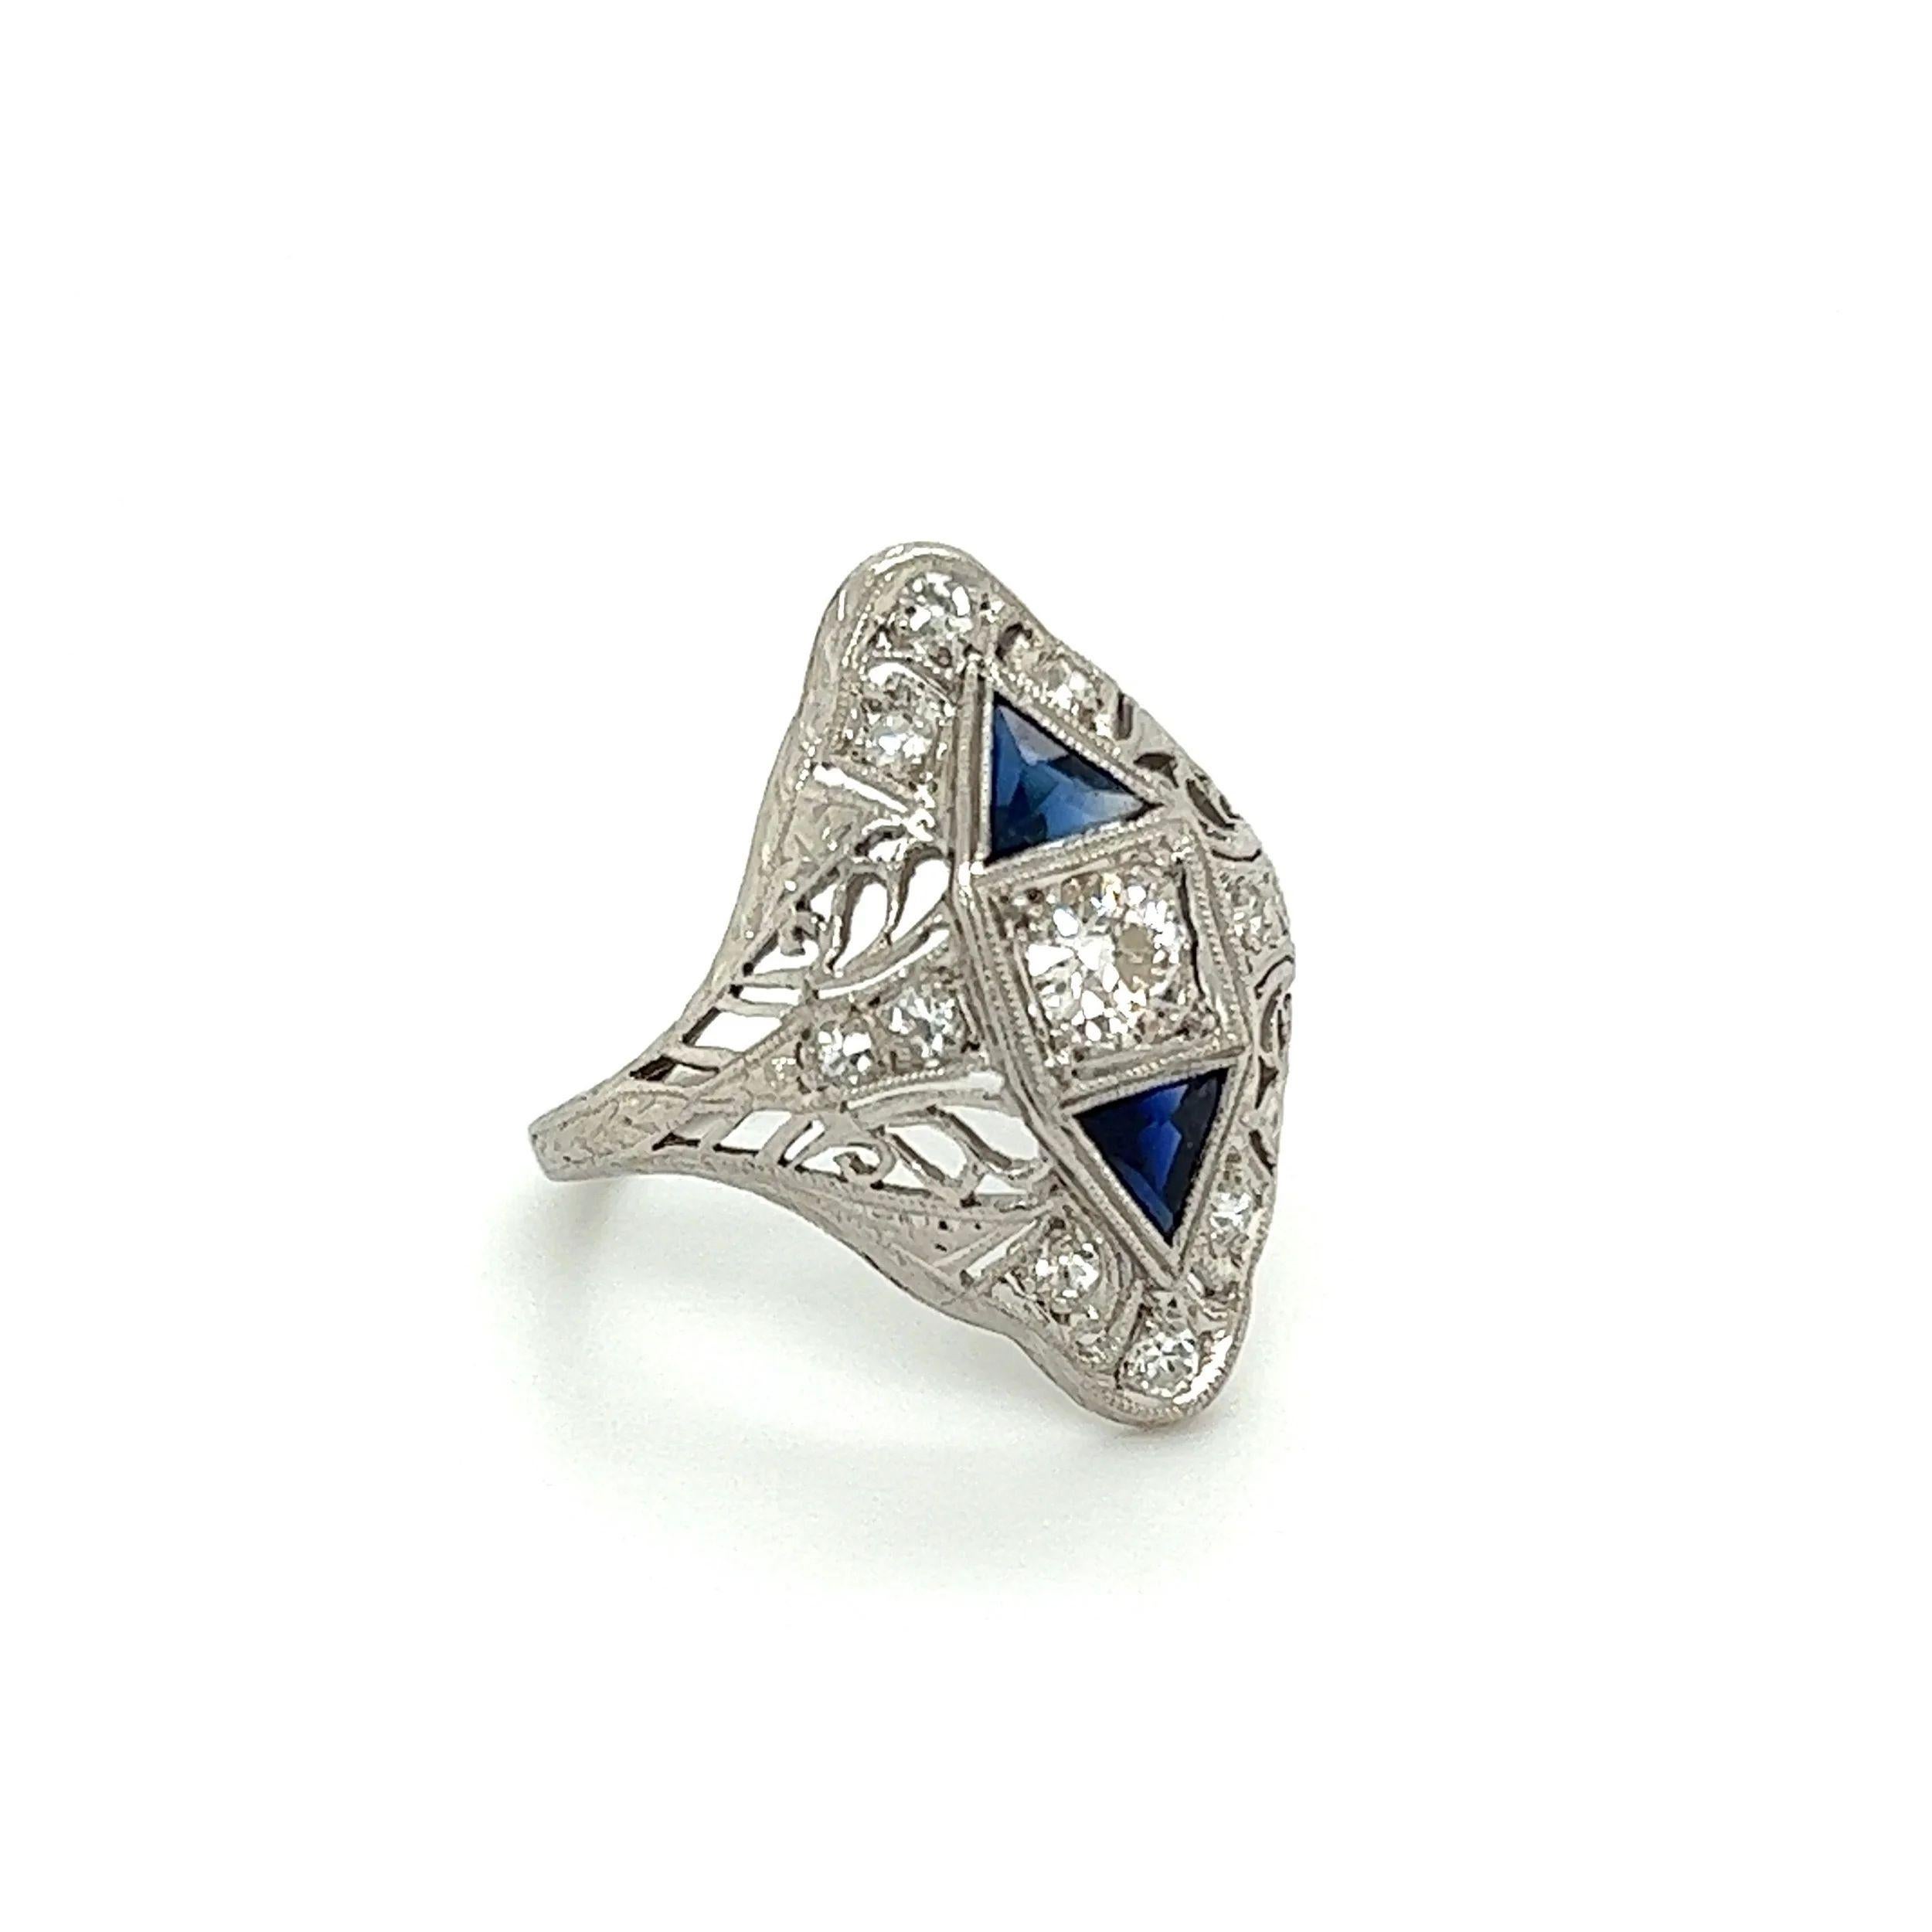 Simply Beautiful! Elegant and finely detailed Art Deco Platinum Diamond and Sapphire Navette Vintage Cocktail Ring. Centering a securely nestled Hand set OEC Diamond, weighing approx. 0.25 Carat. Surrounded by Diamonds, approx. 0.18tcw, accented by